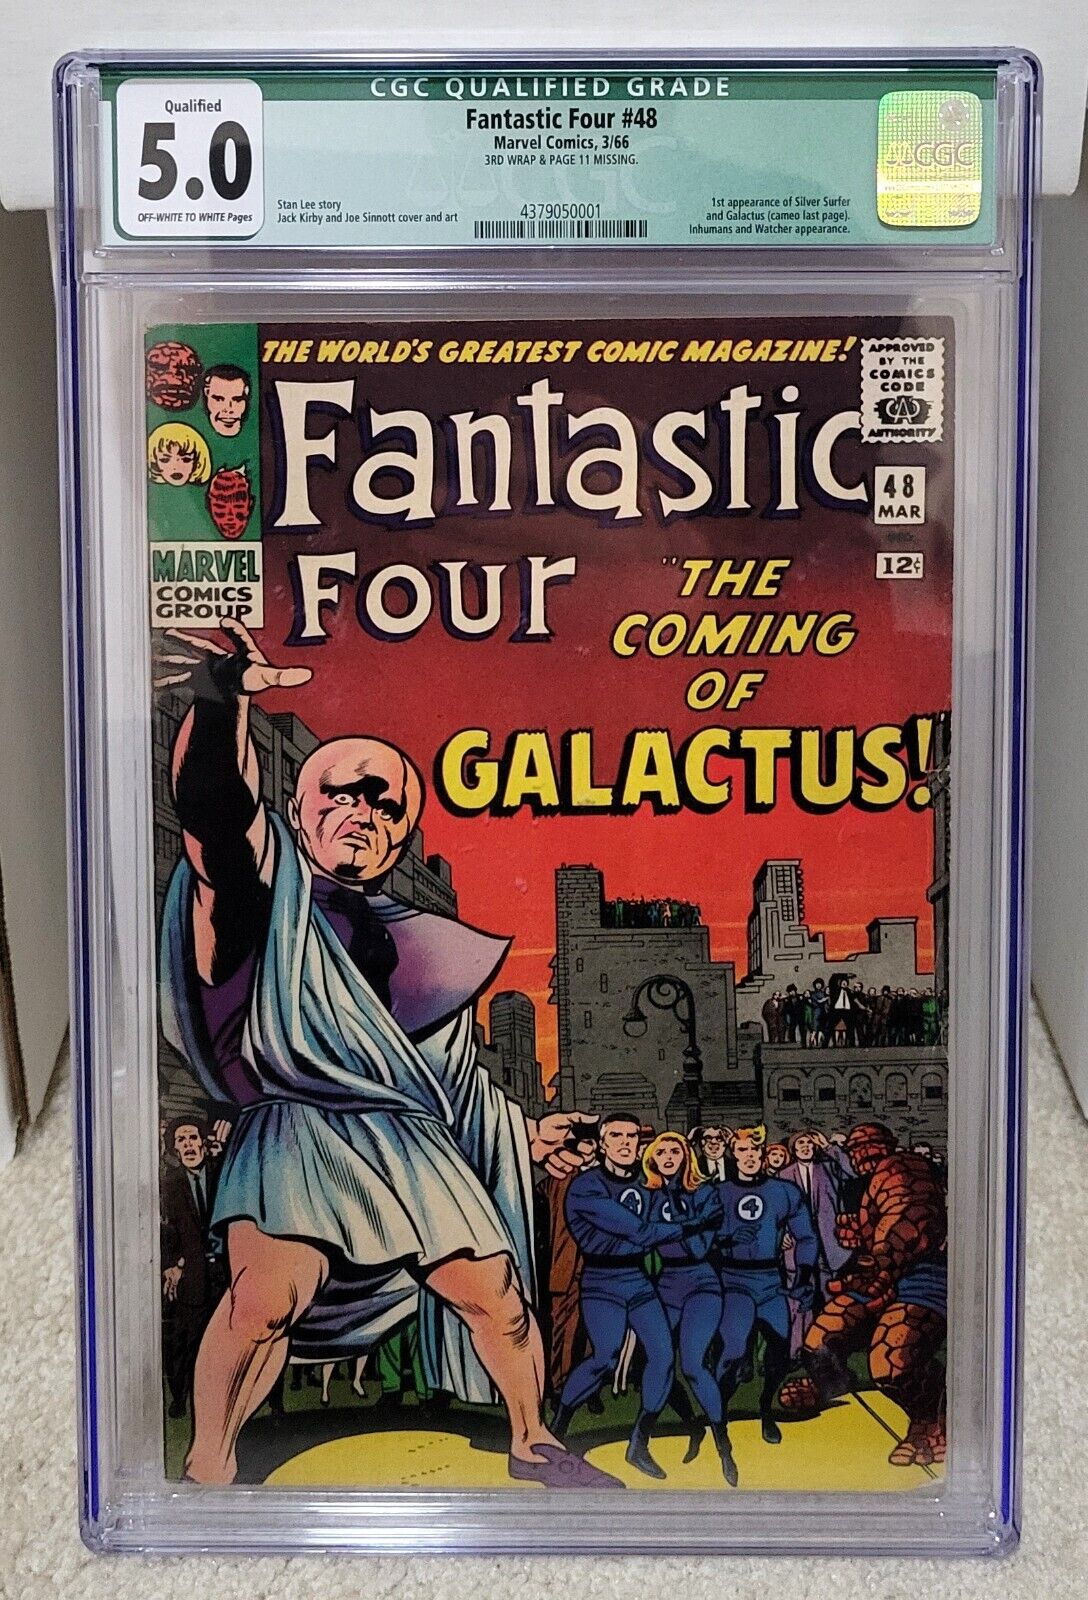 Fantastic Four #48 (1966) CGC 5.0 QUALIFIED -1st Silver Surfer & Galactus Marvel